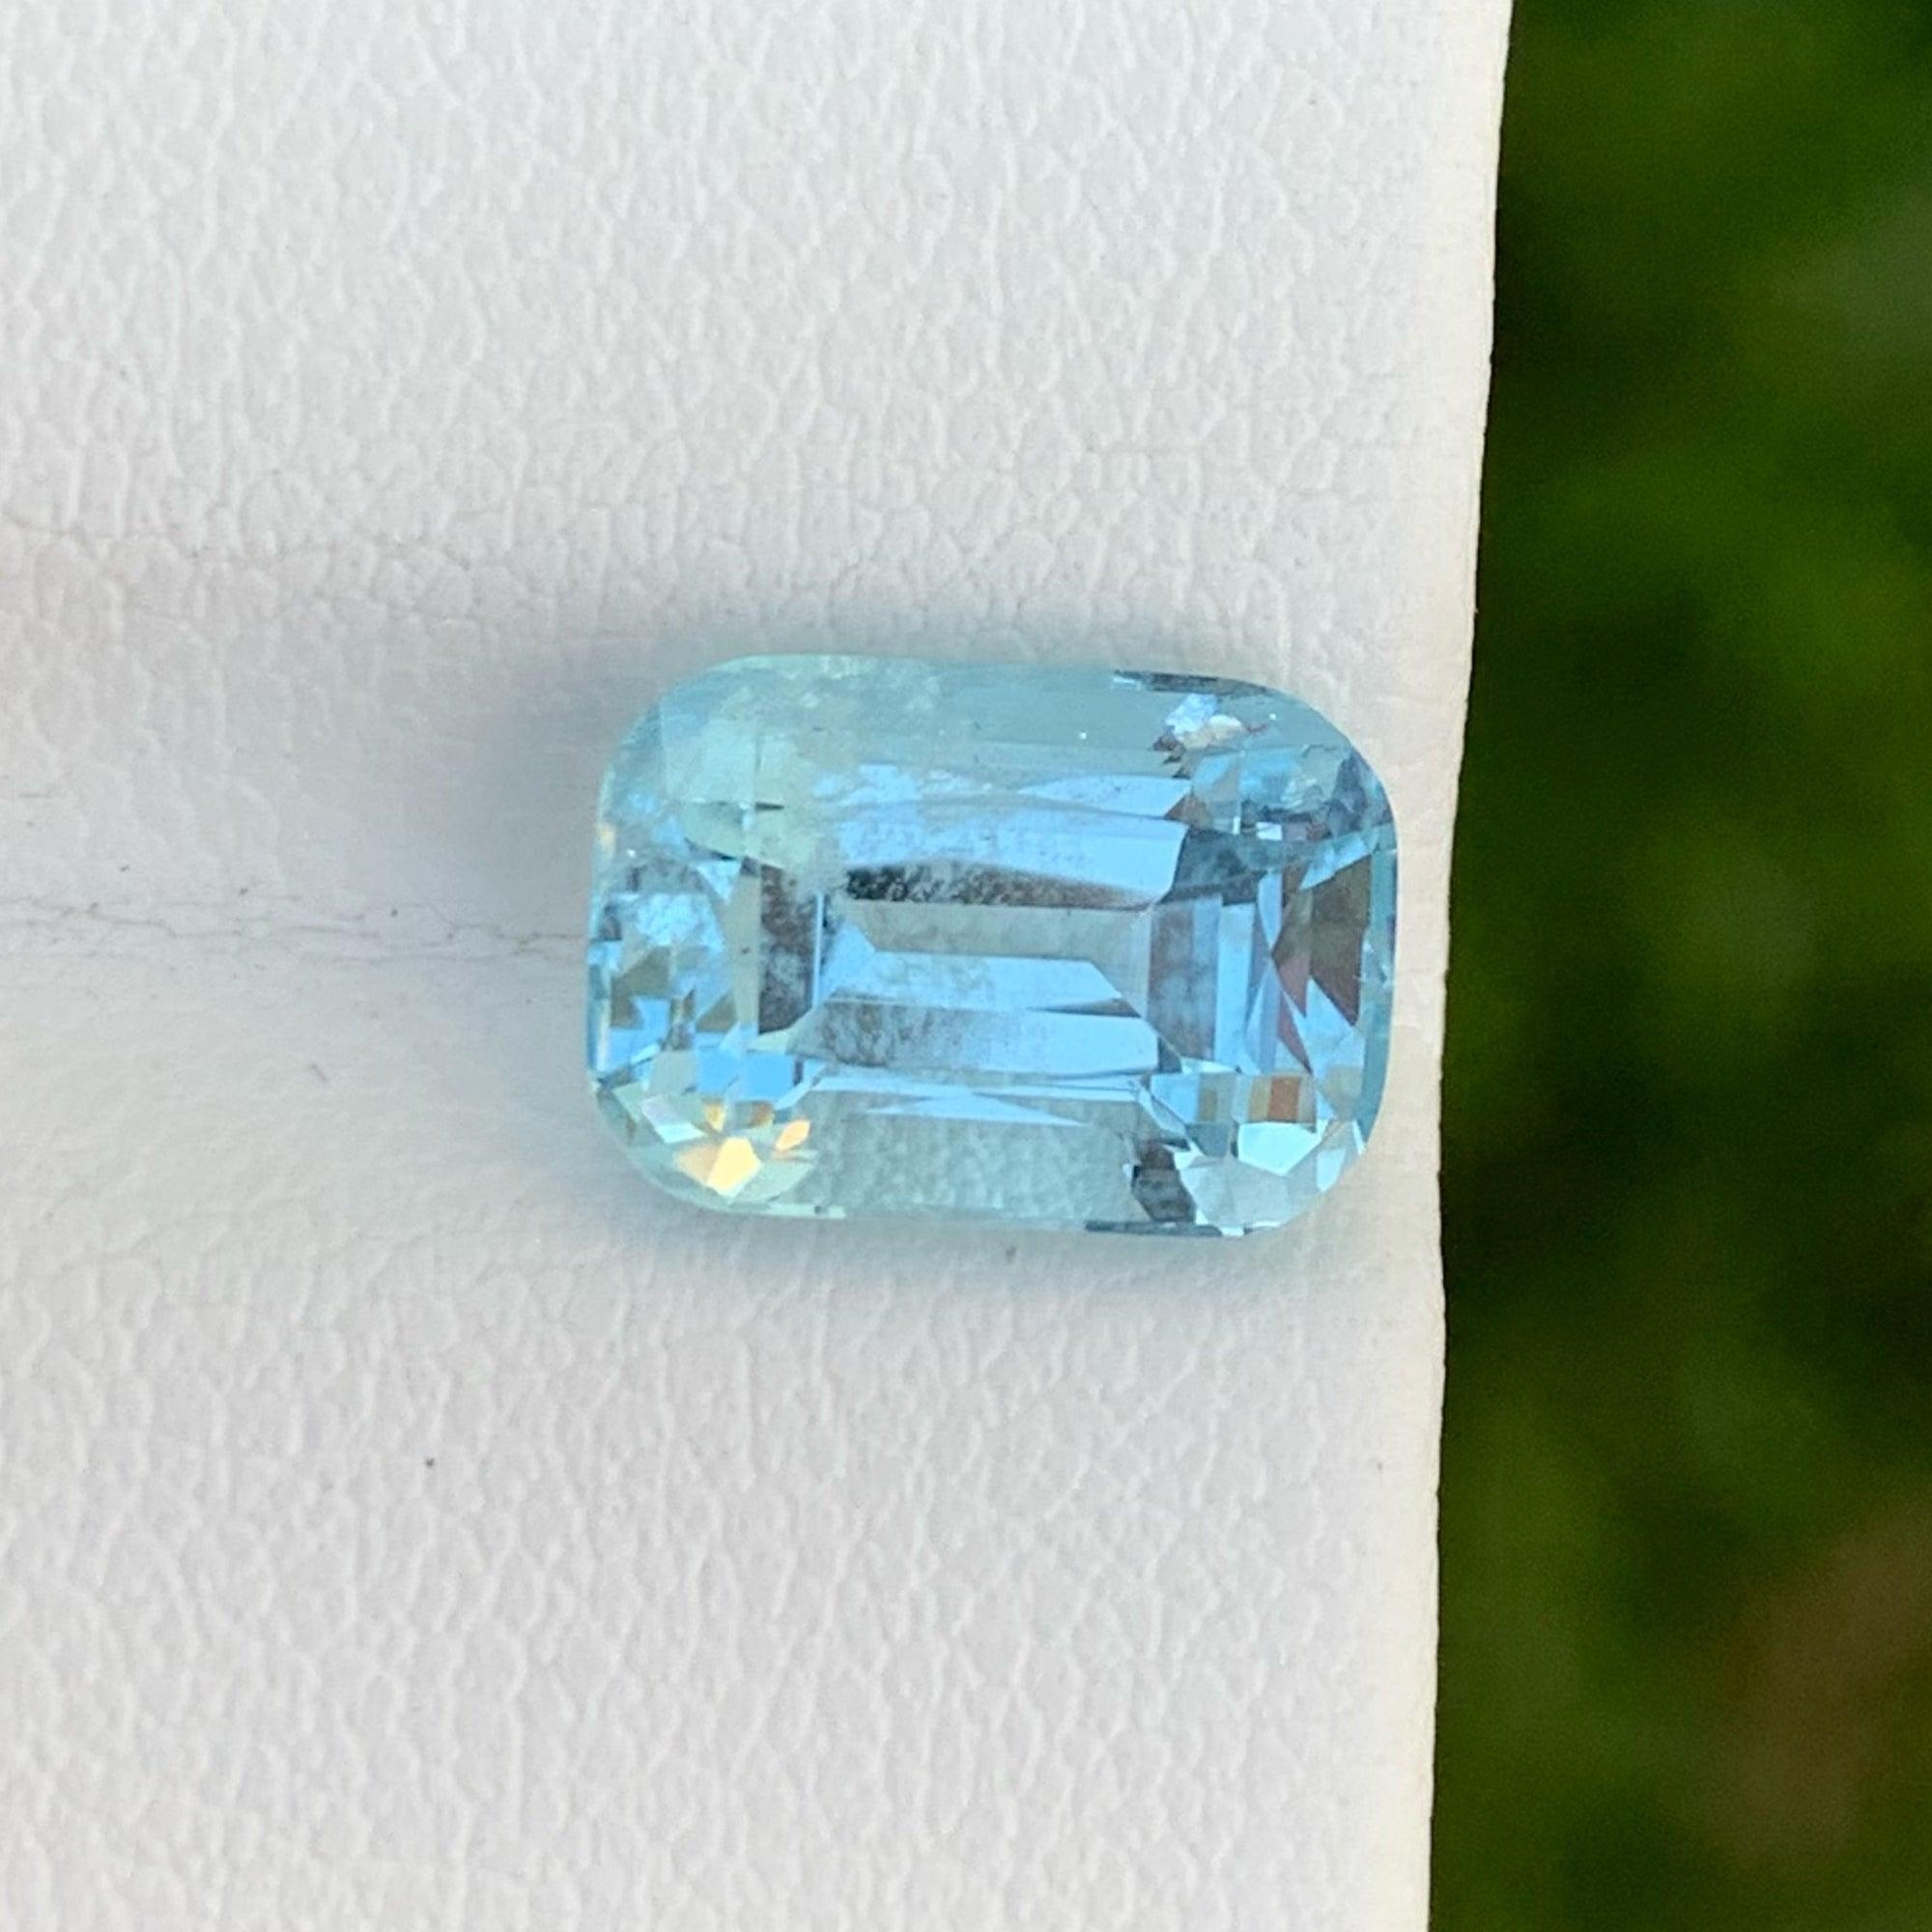 Brilliant Sky Blue Aquamarine Gemstone, Available for sale at wholesale price natural high quality 3.25 SI Clean Clarity Natural Loose Aquamarine from Madagascar.

Product Information:
GEMSTONE NAME:	Brilliant Sky Blue Aquamarine